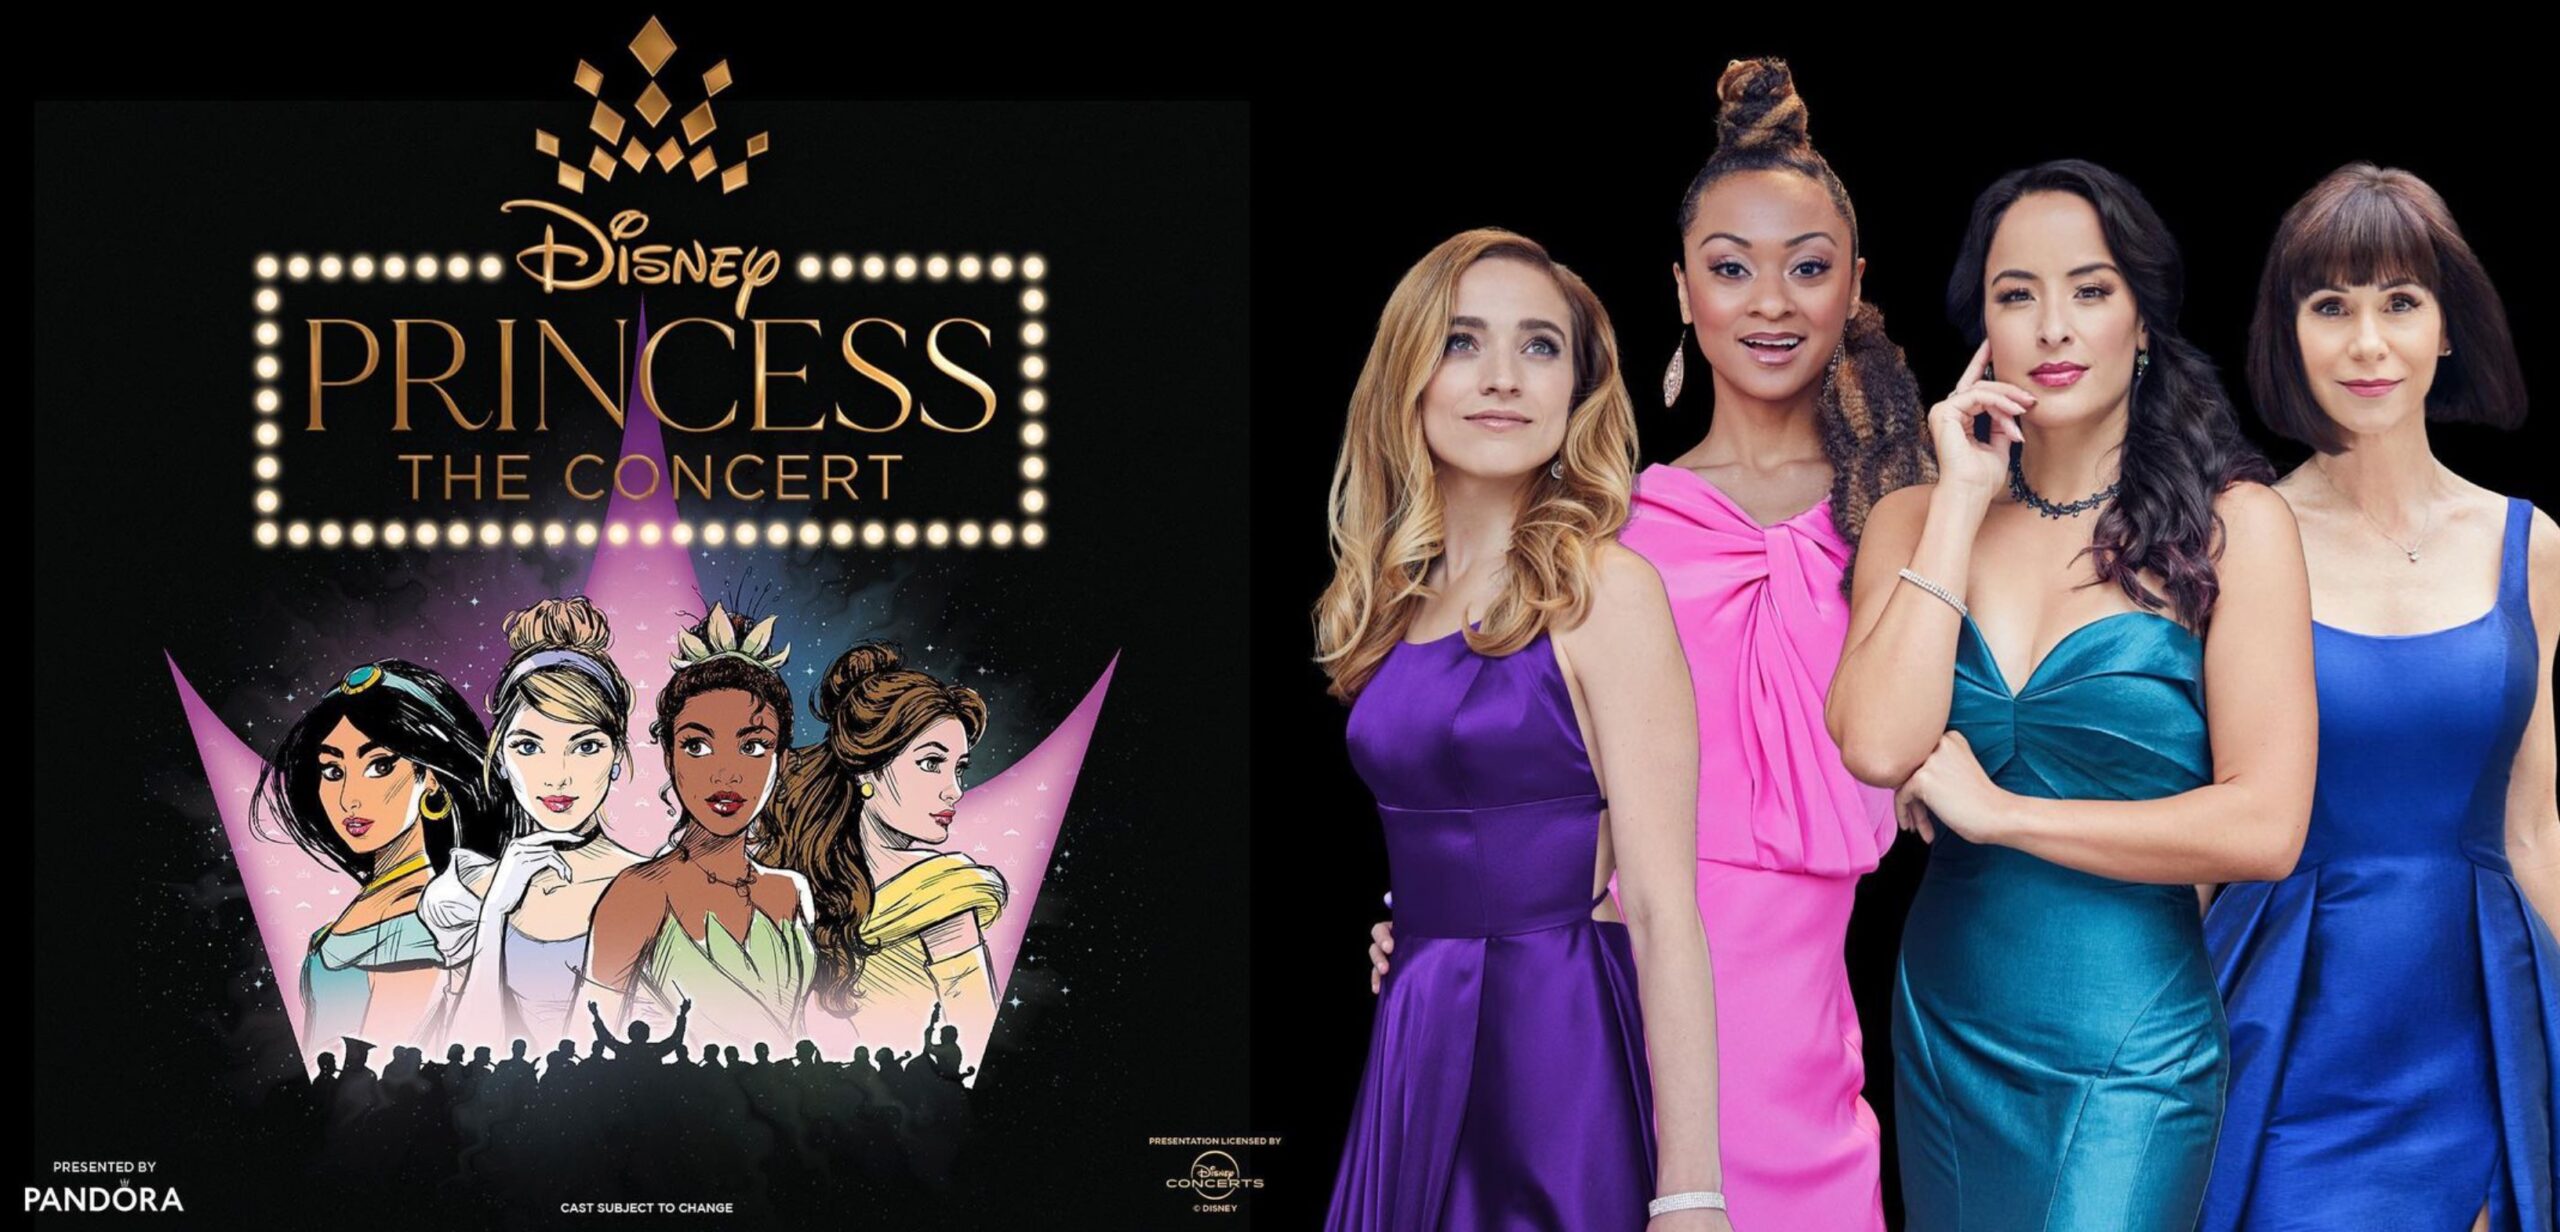 Disney on Broadway Stars to Be Featured in New Show 'Disney Princess: The Concert'